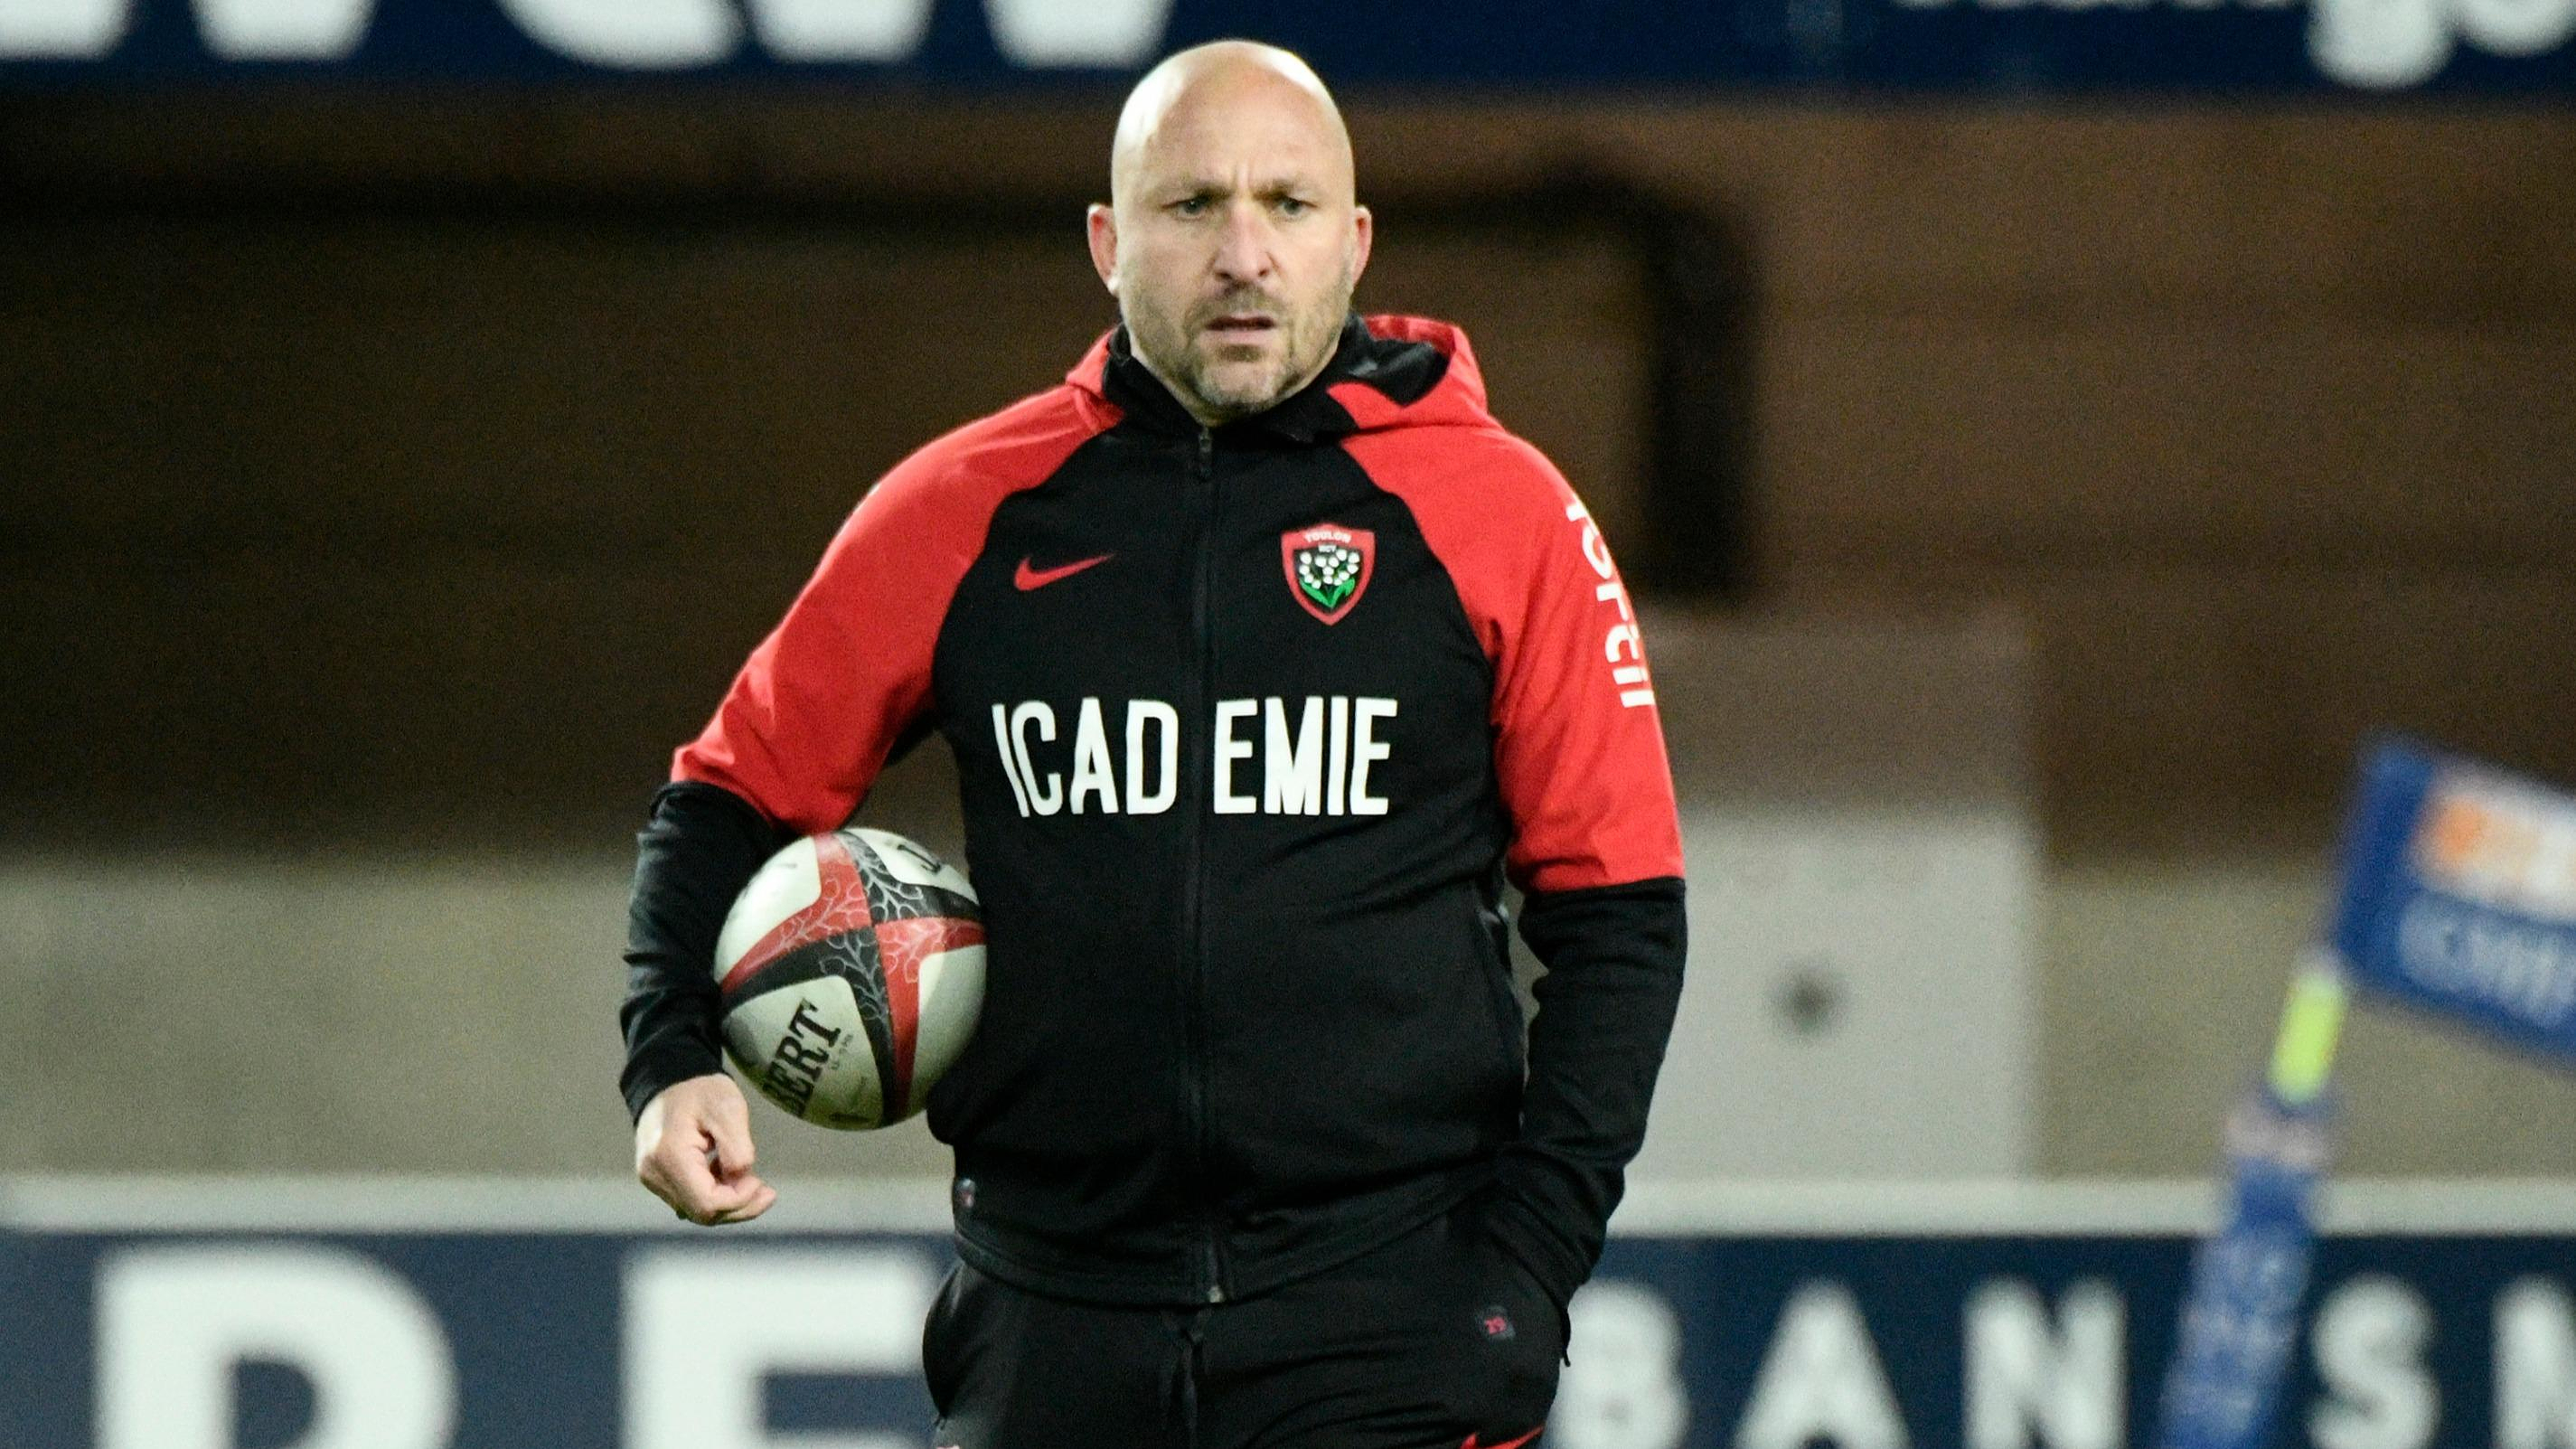 Top 14: Toulon must “gain consistency because this team is not consistent at all”, warns Mignoni